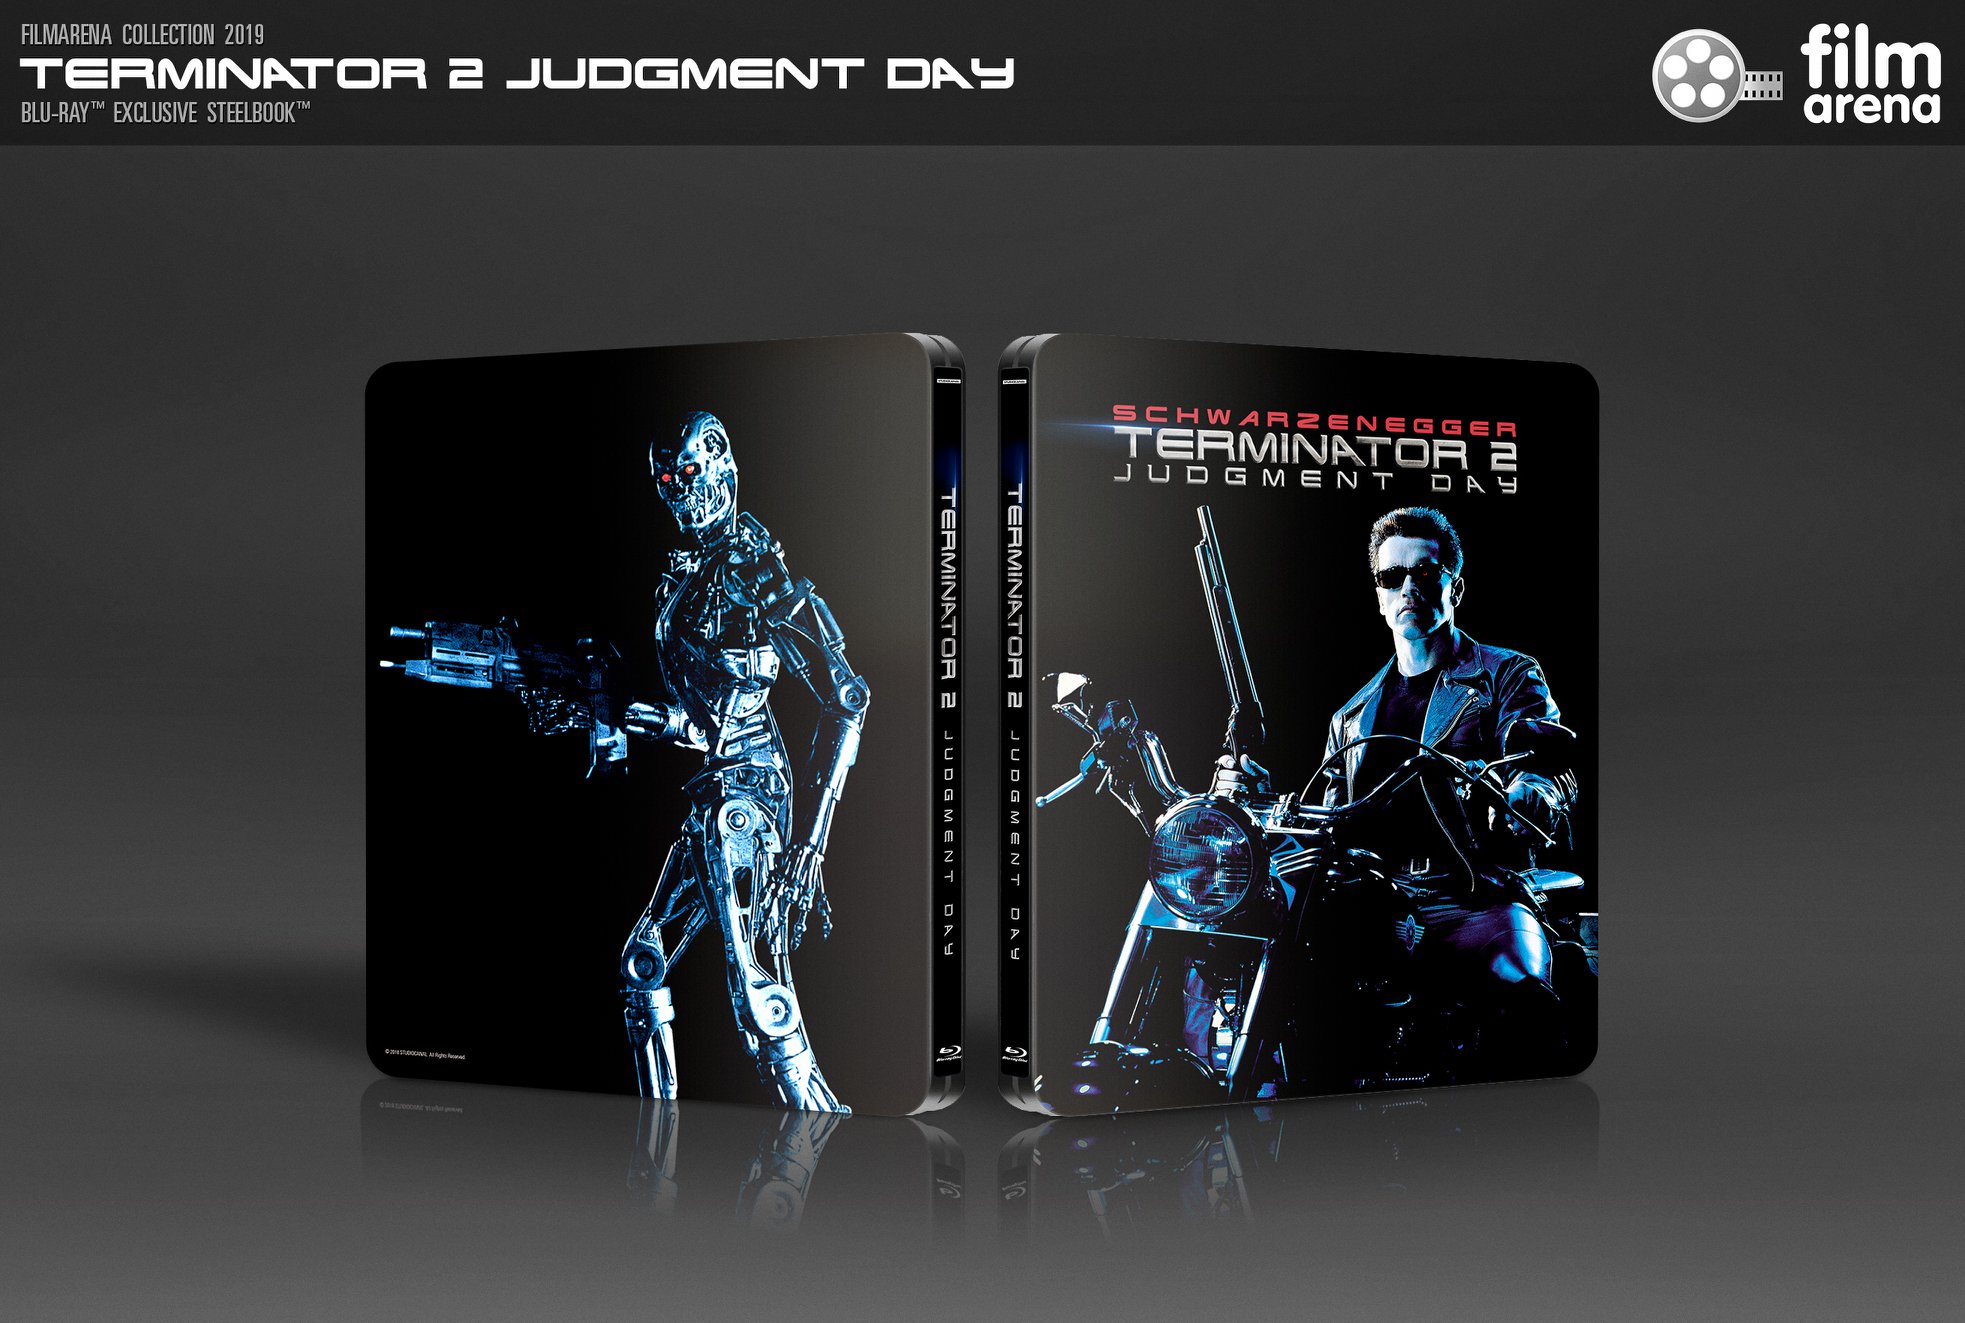 Filmarena Collection Terminator 2: Judgment Day 3D and 4K UHD WEA